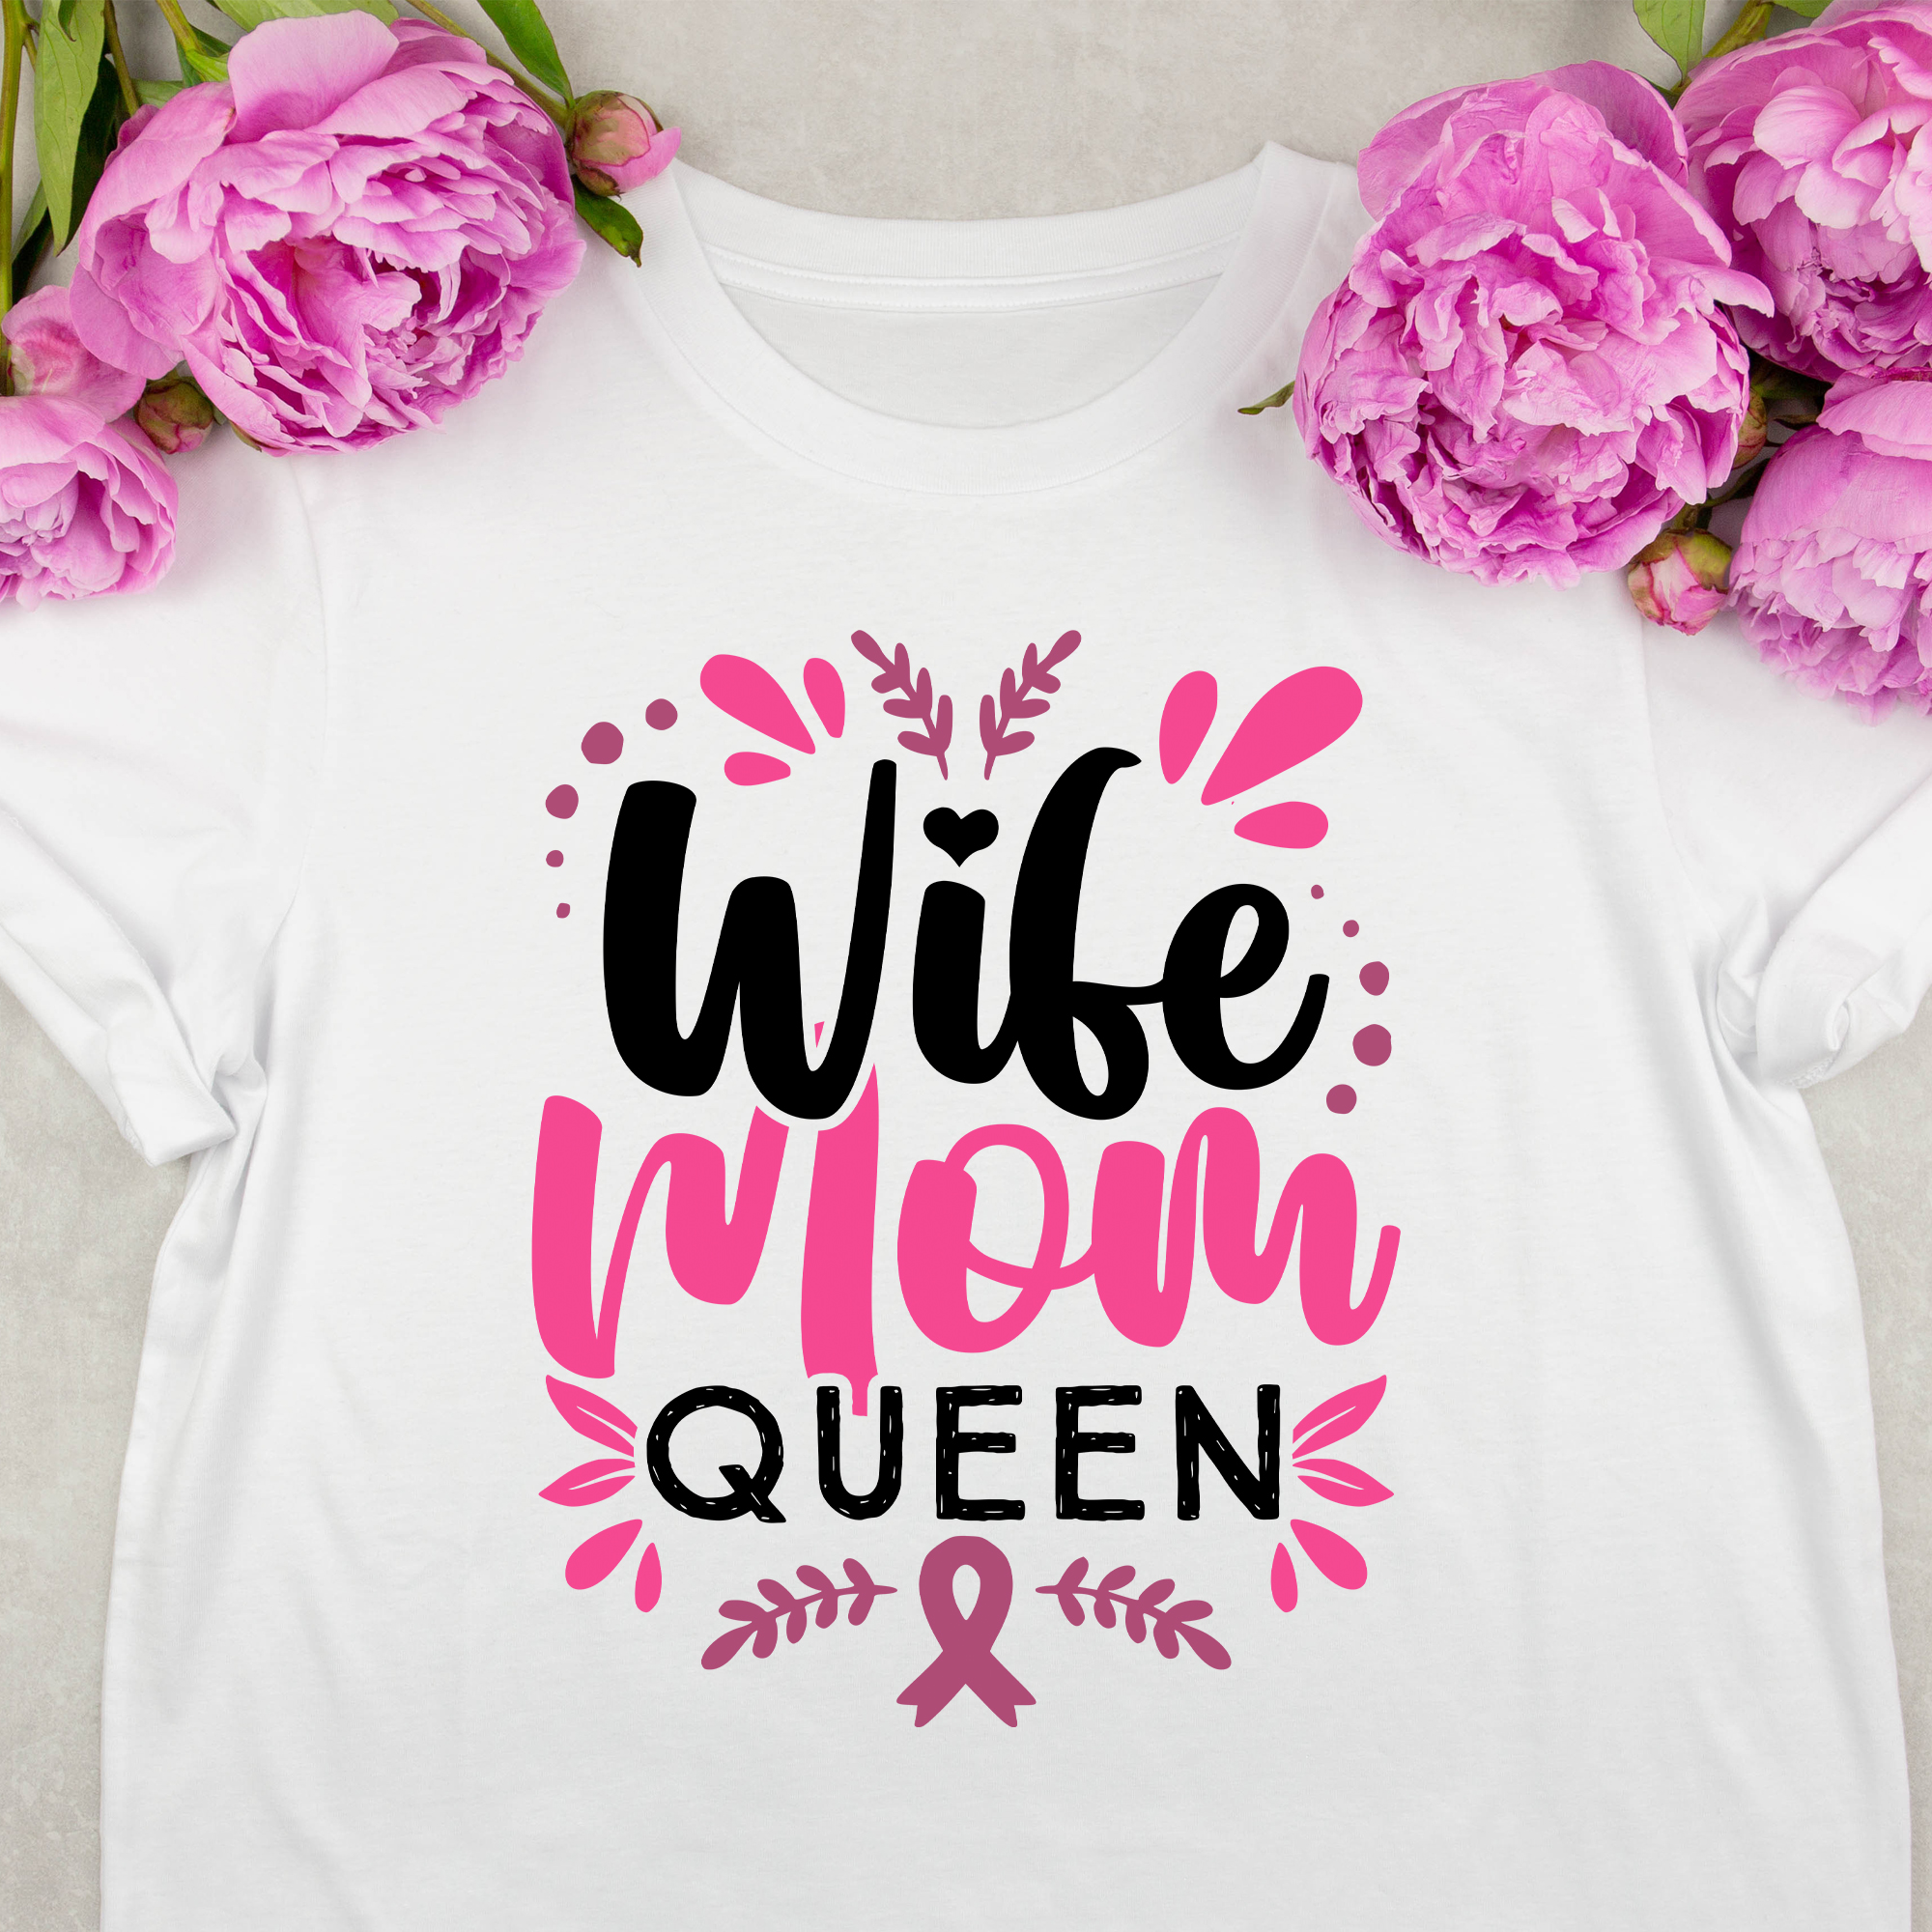 White womens cotton t-shirt mockup with pink peony flowers on gray concrete background. Design t shirt template, print presentation mock up. Top view flat lay.